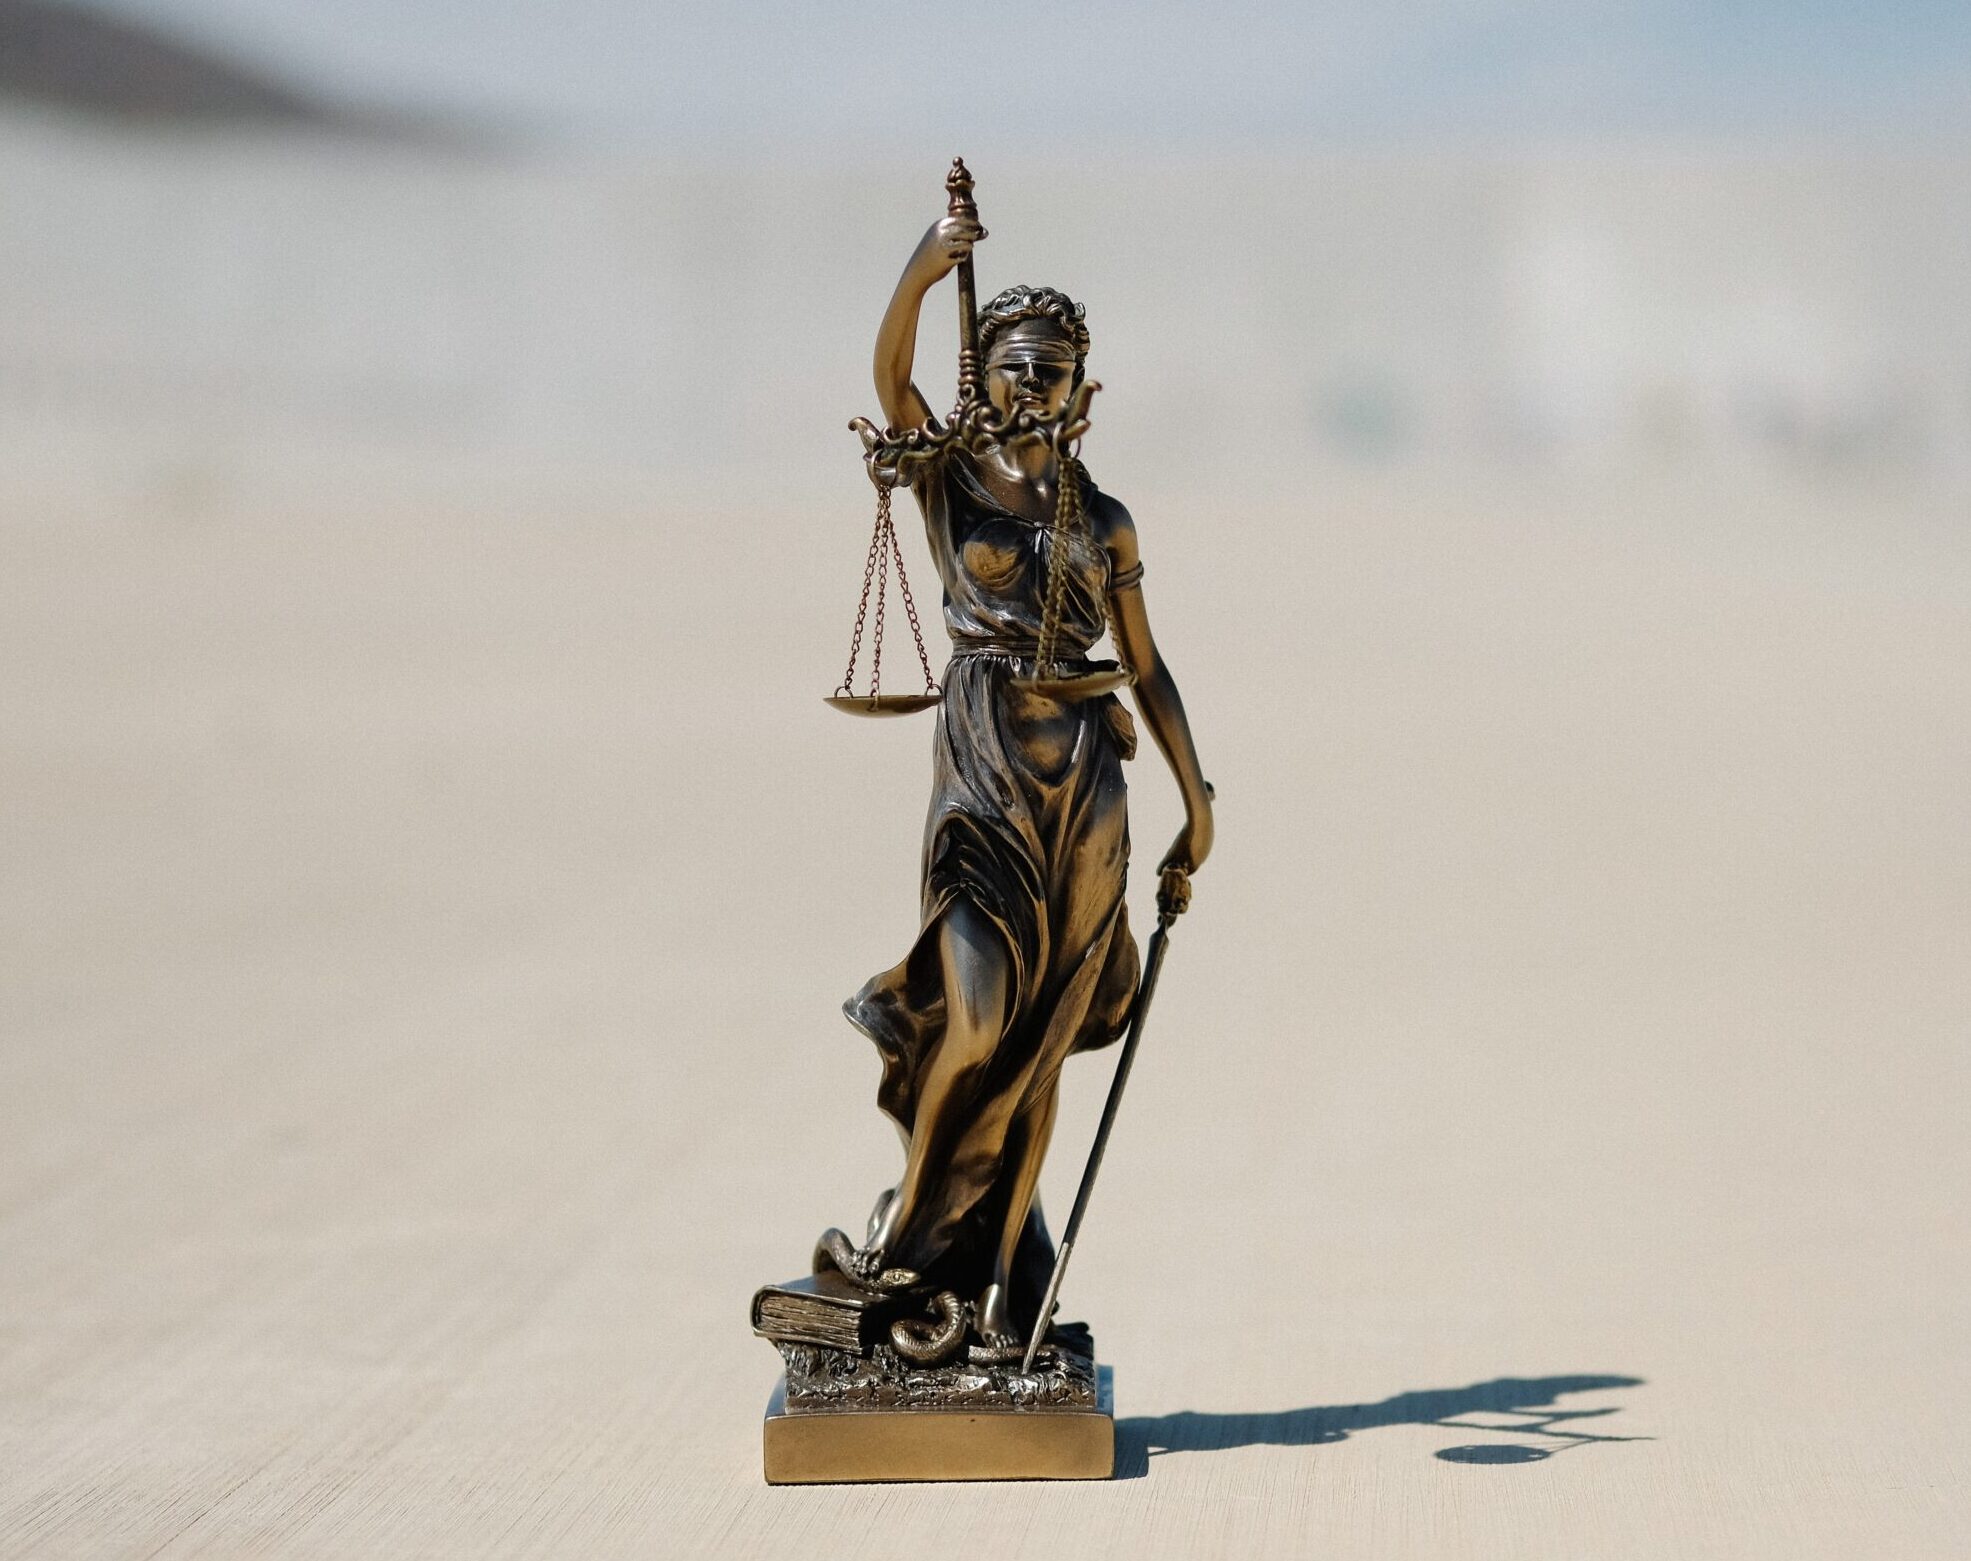 Lady justice to the rescue!